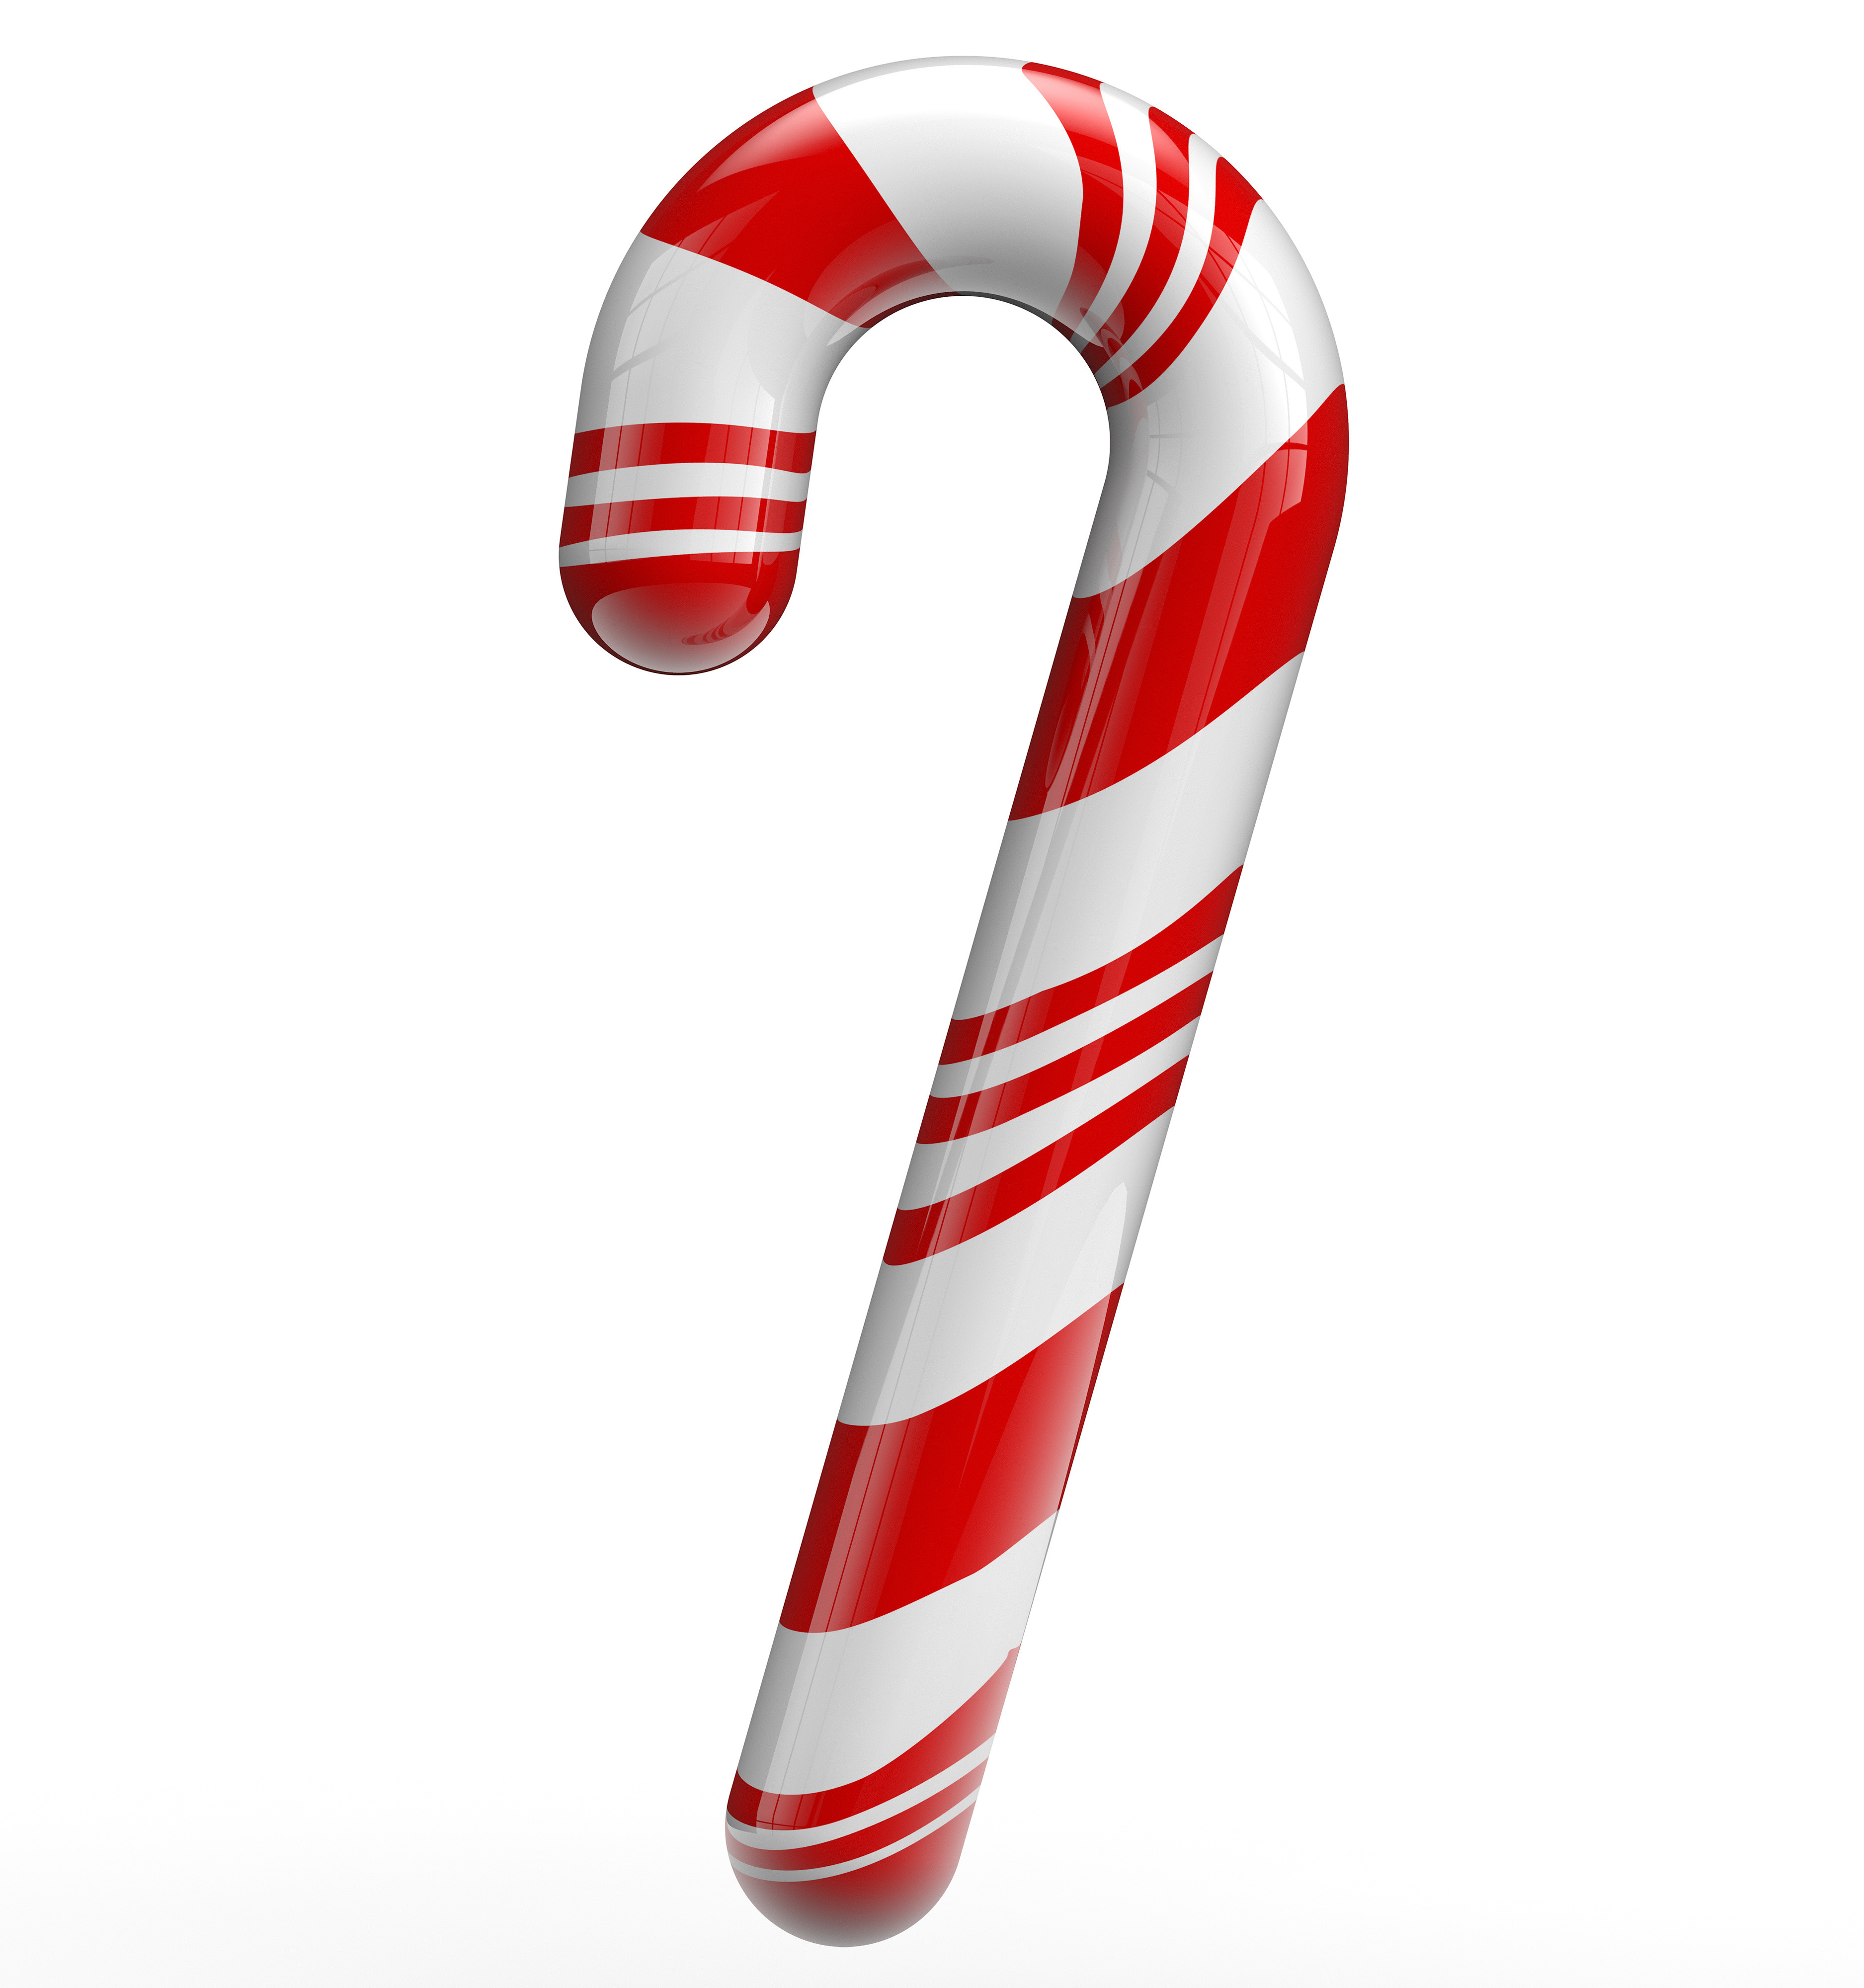 Christmas Candy Canes
 candy cane – 88 Piano Keys